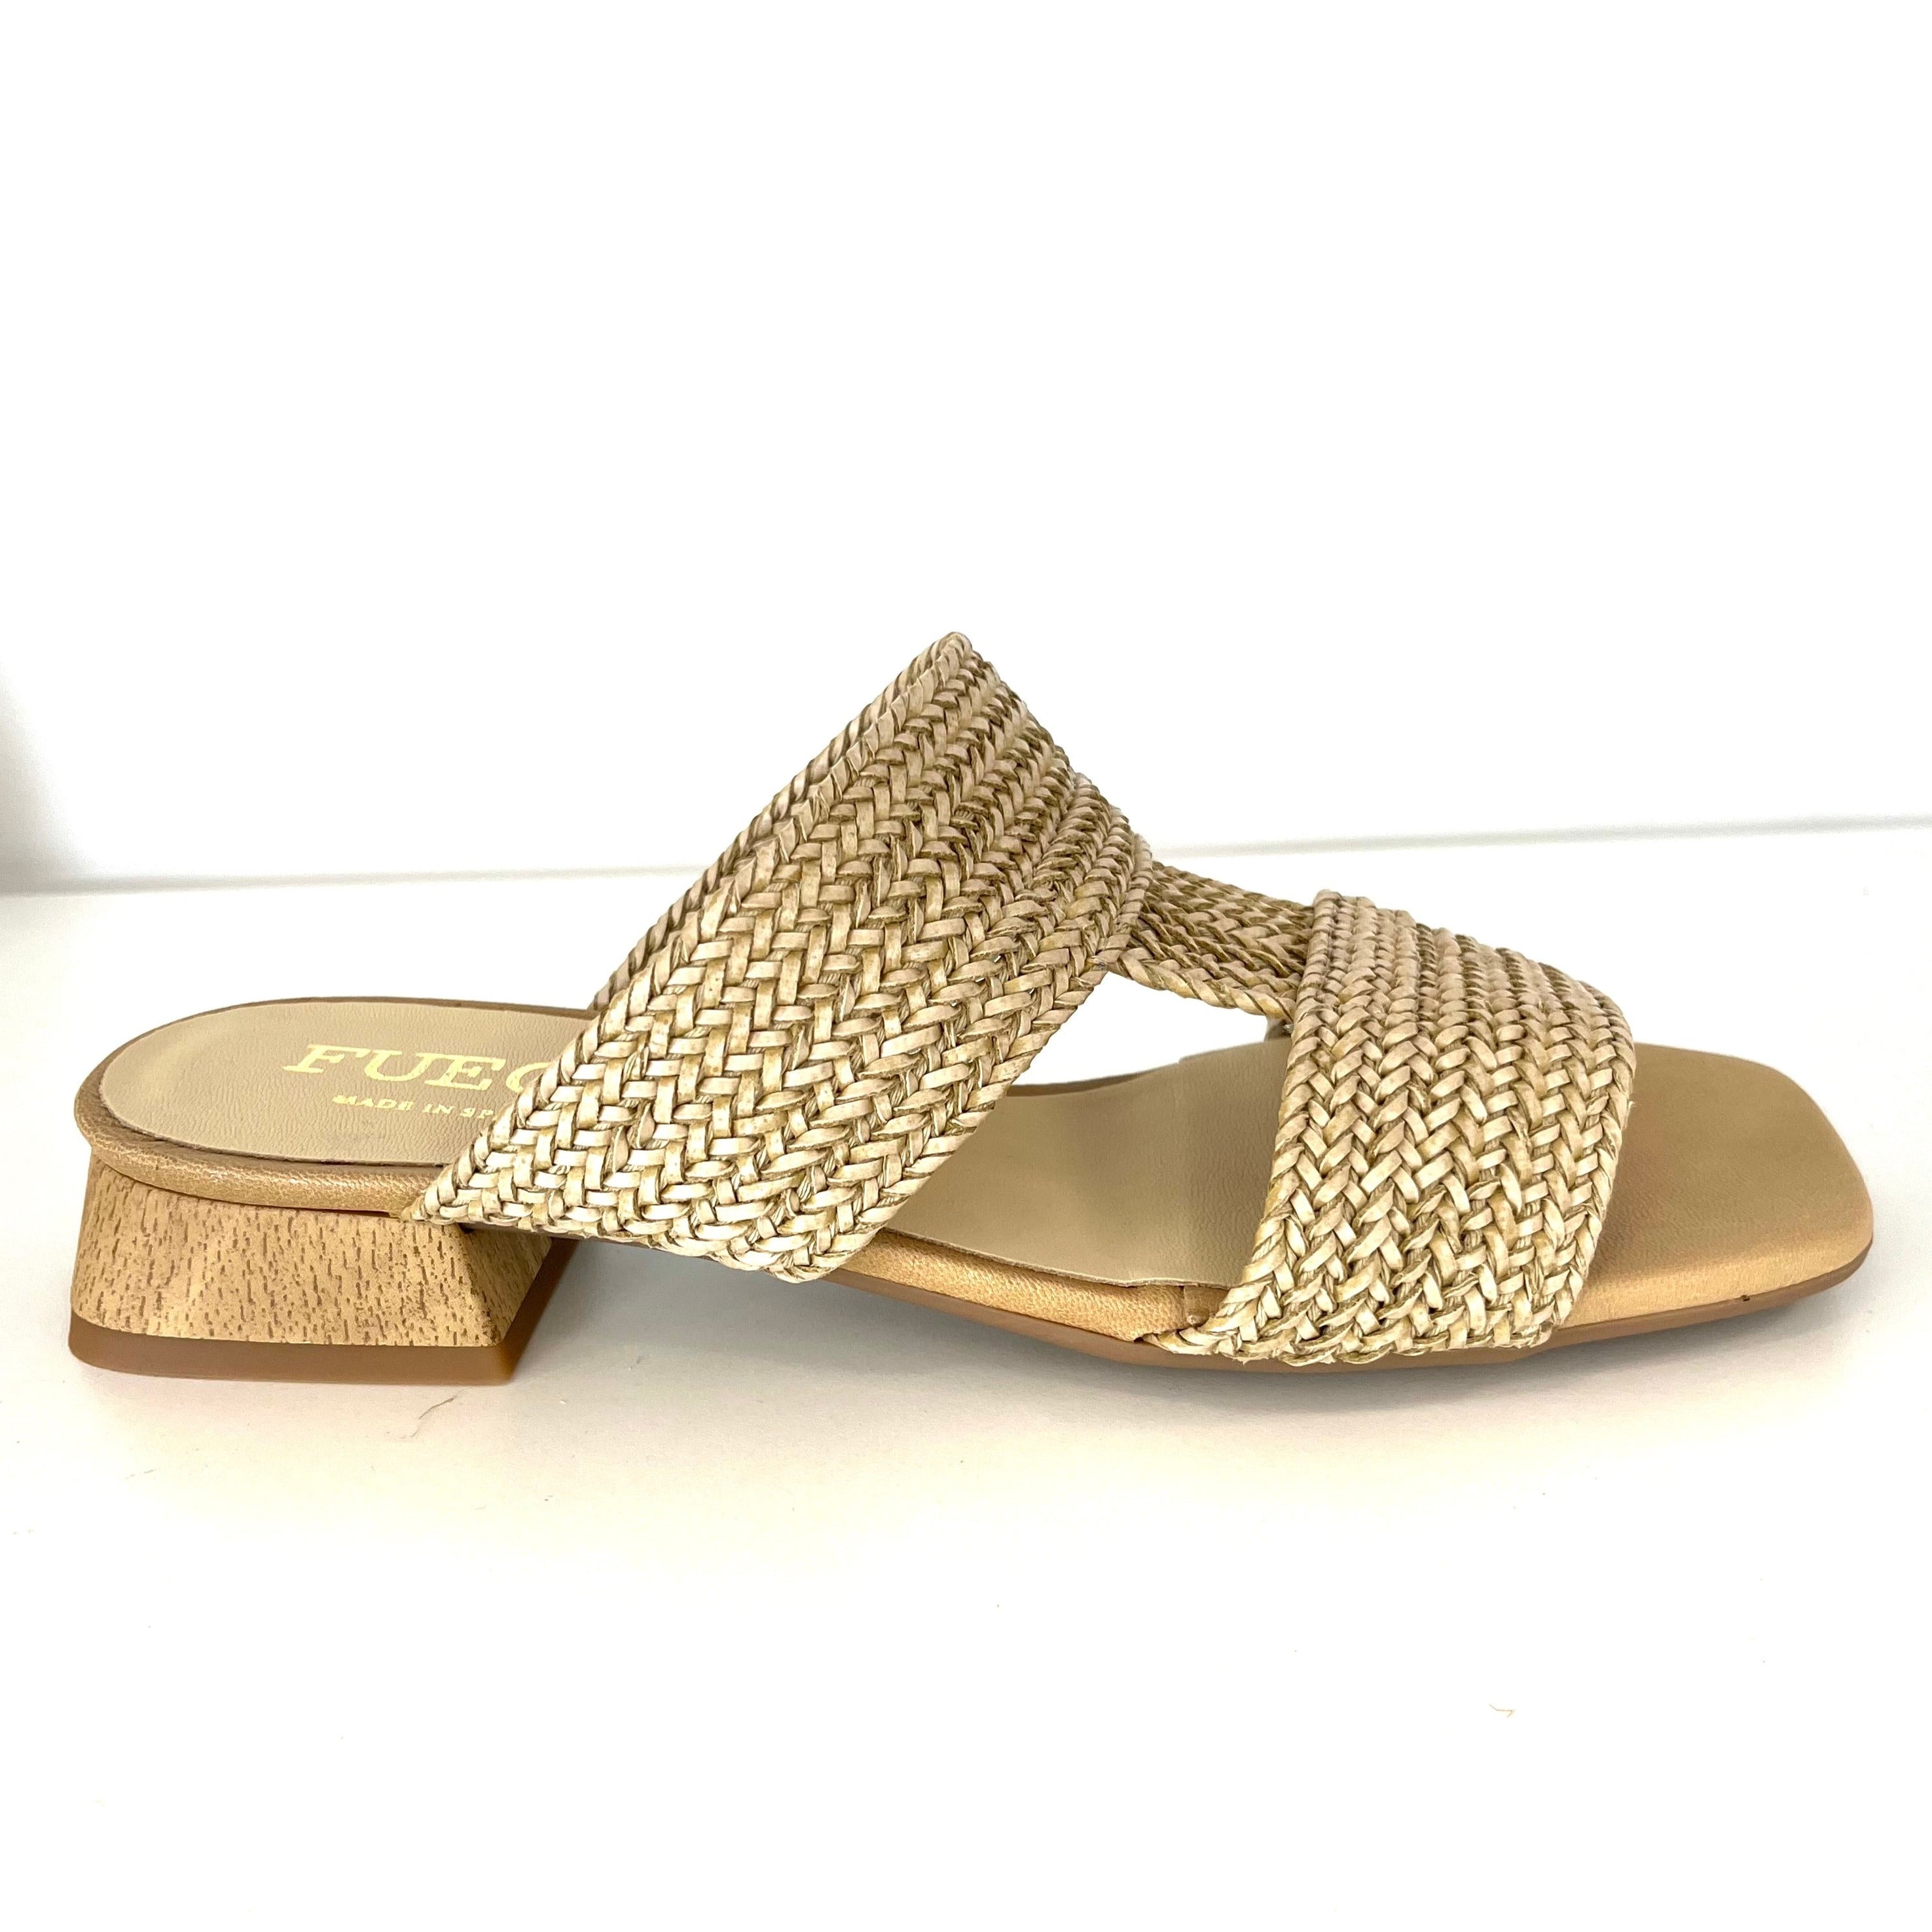 The Woven Leather T-Strap Sandal in Natural